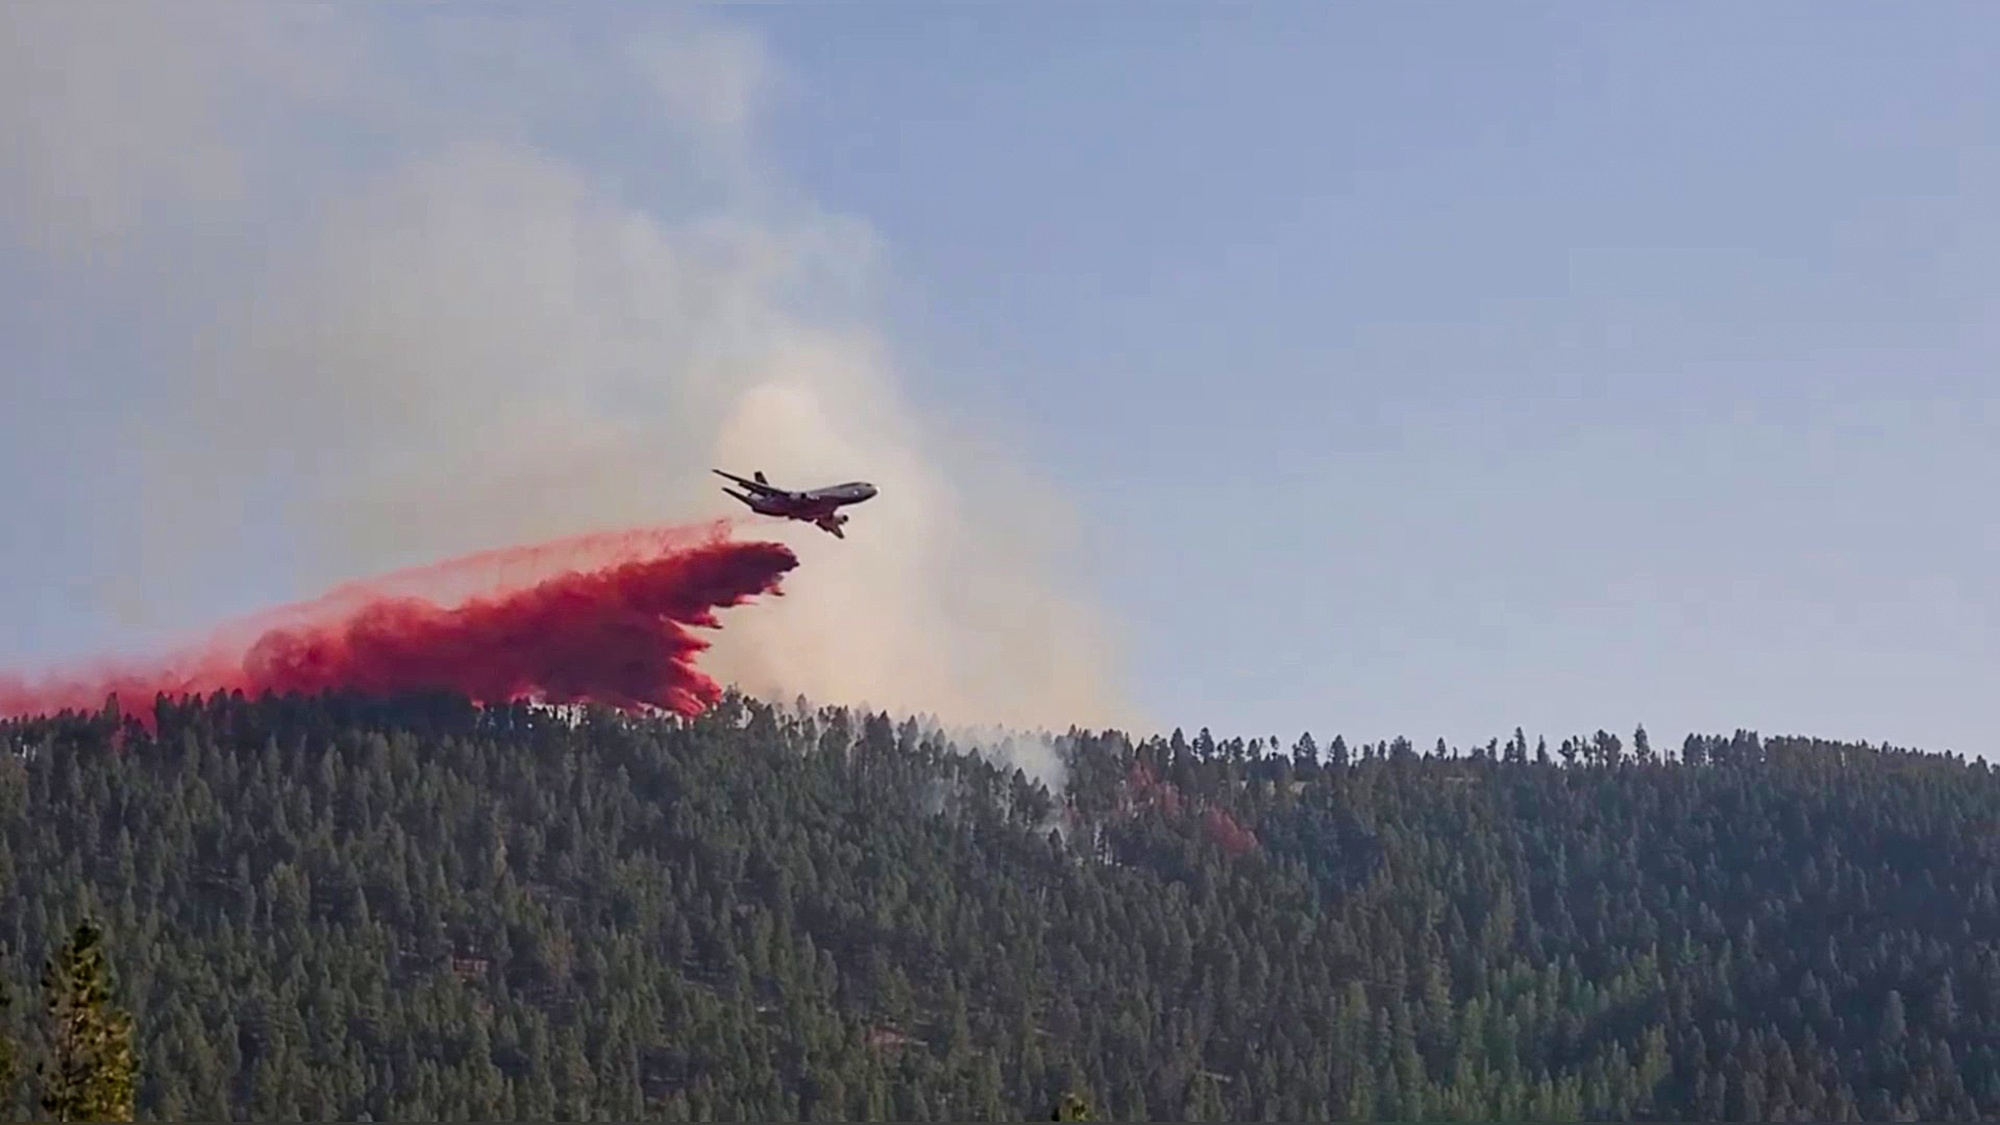 Read more about the article AMERICAN AIRSPRAYS: Planes Used To Quench Montana Wildfire